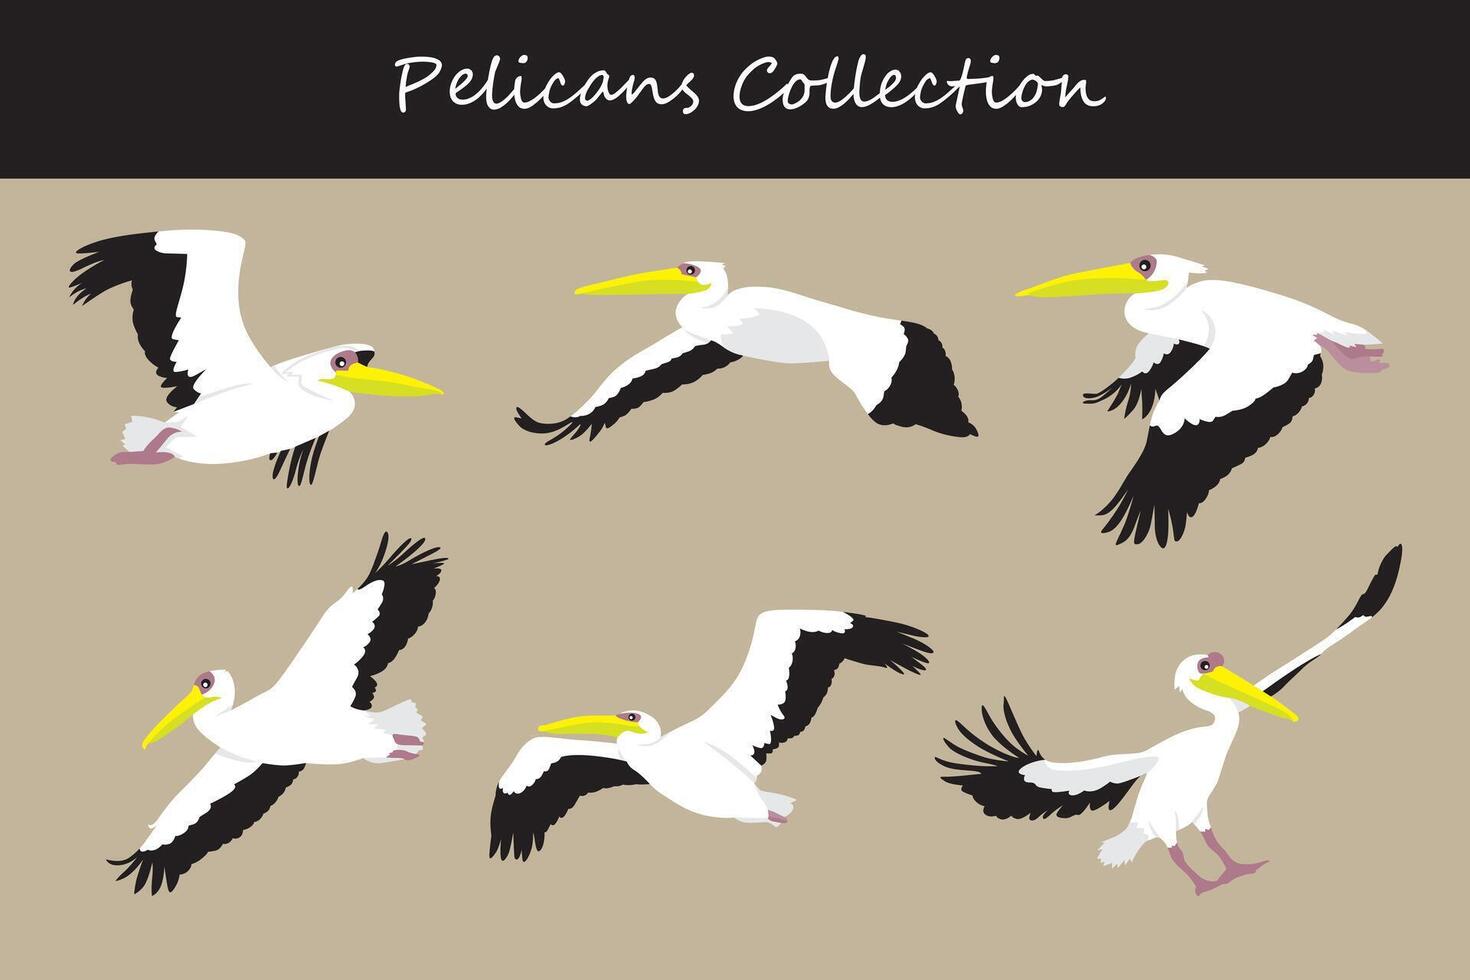 Pelican collection. Pelican in different poses vector